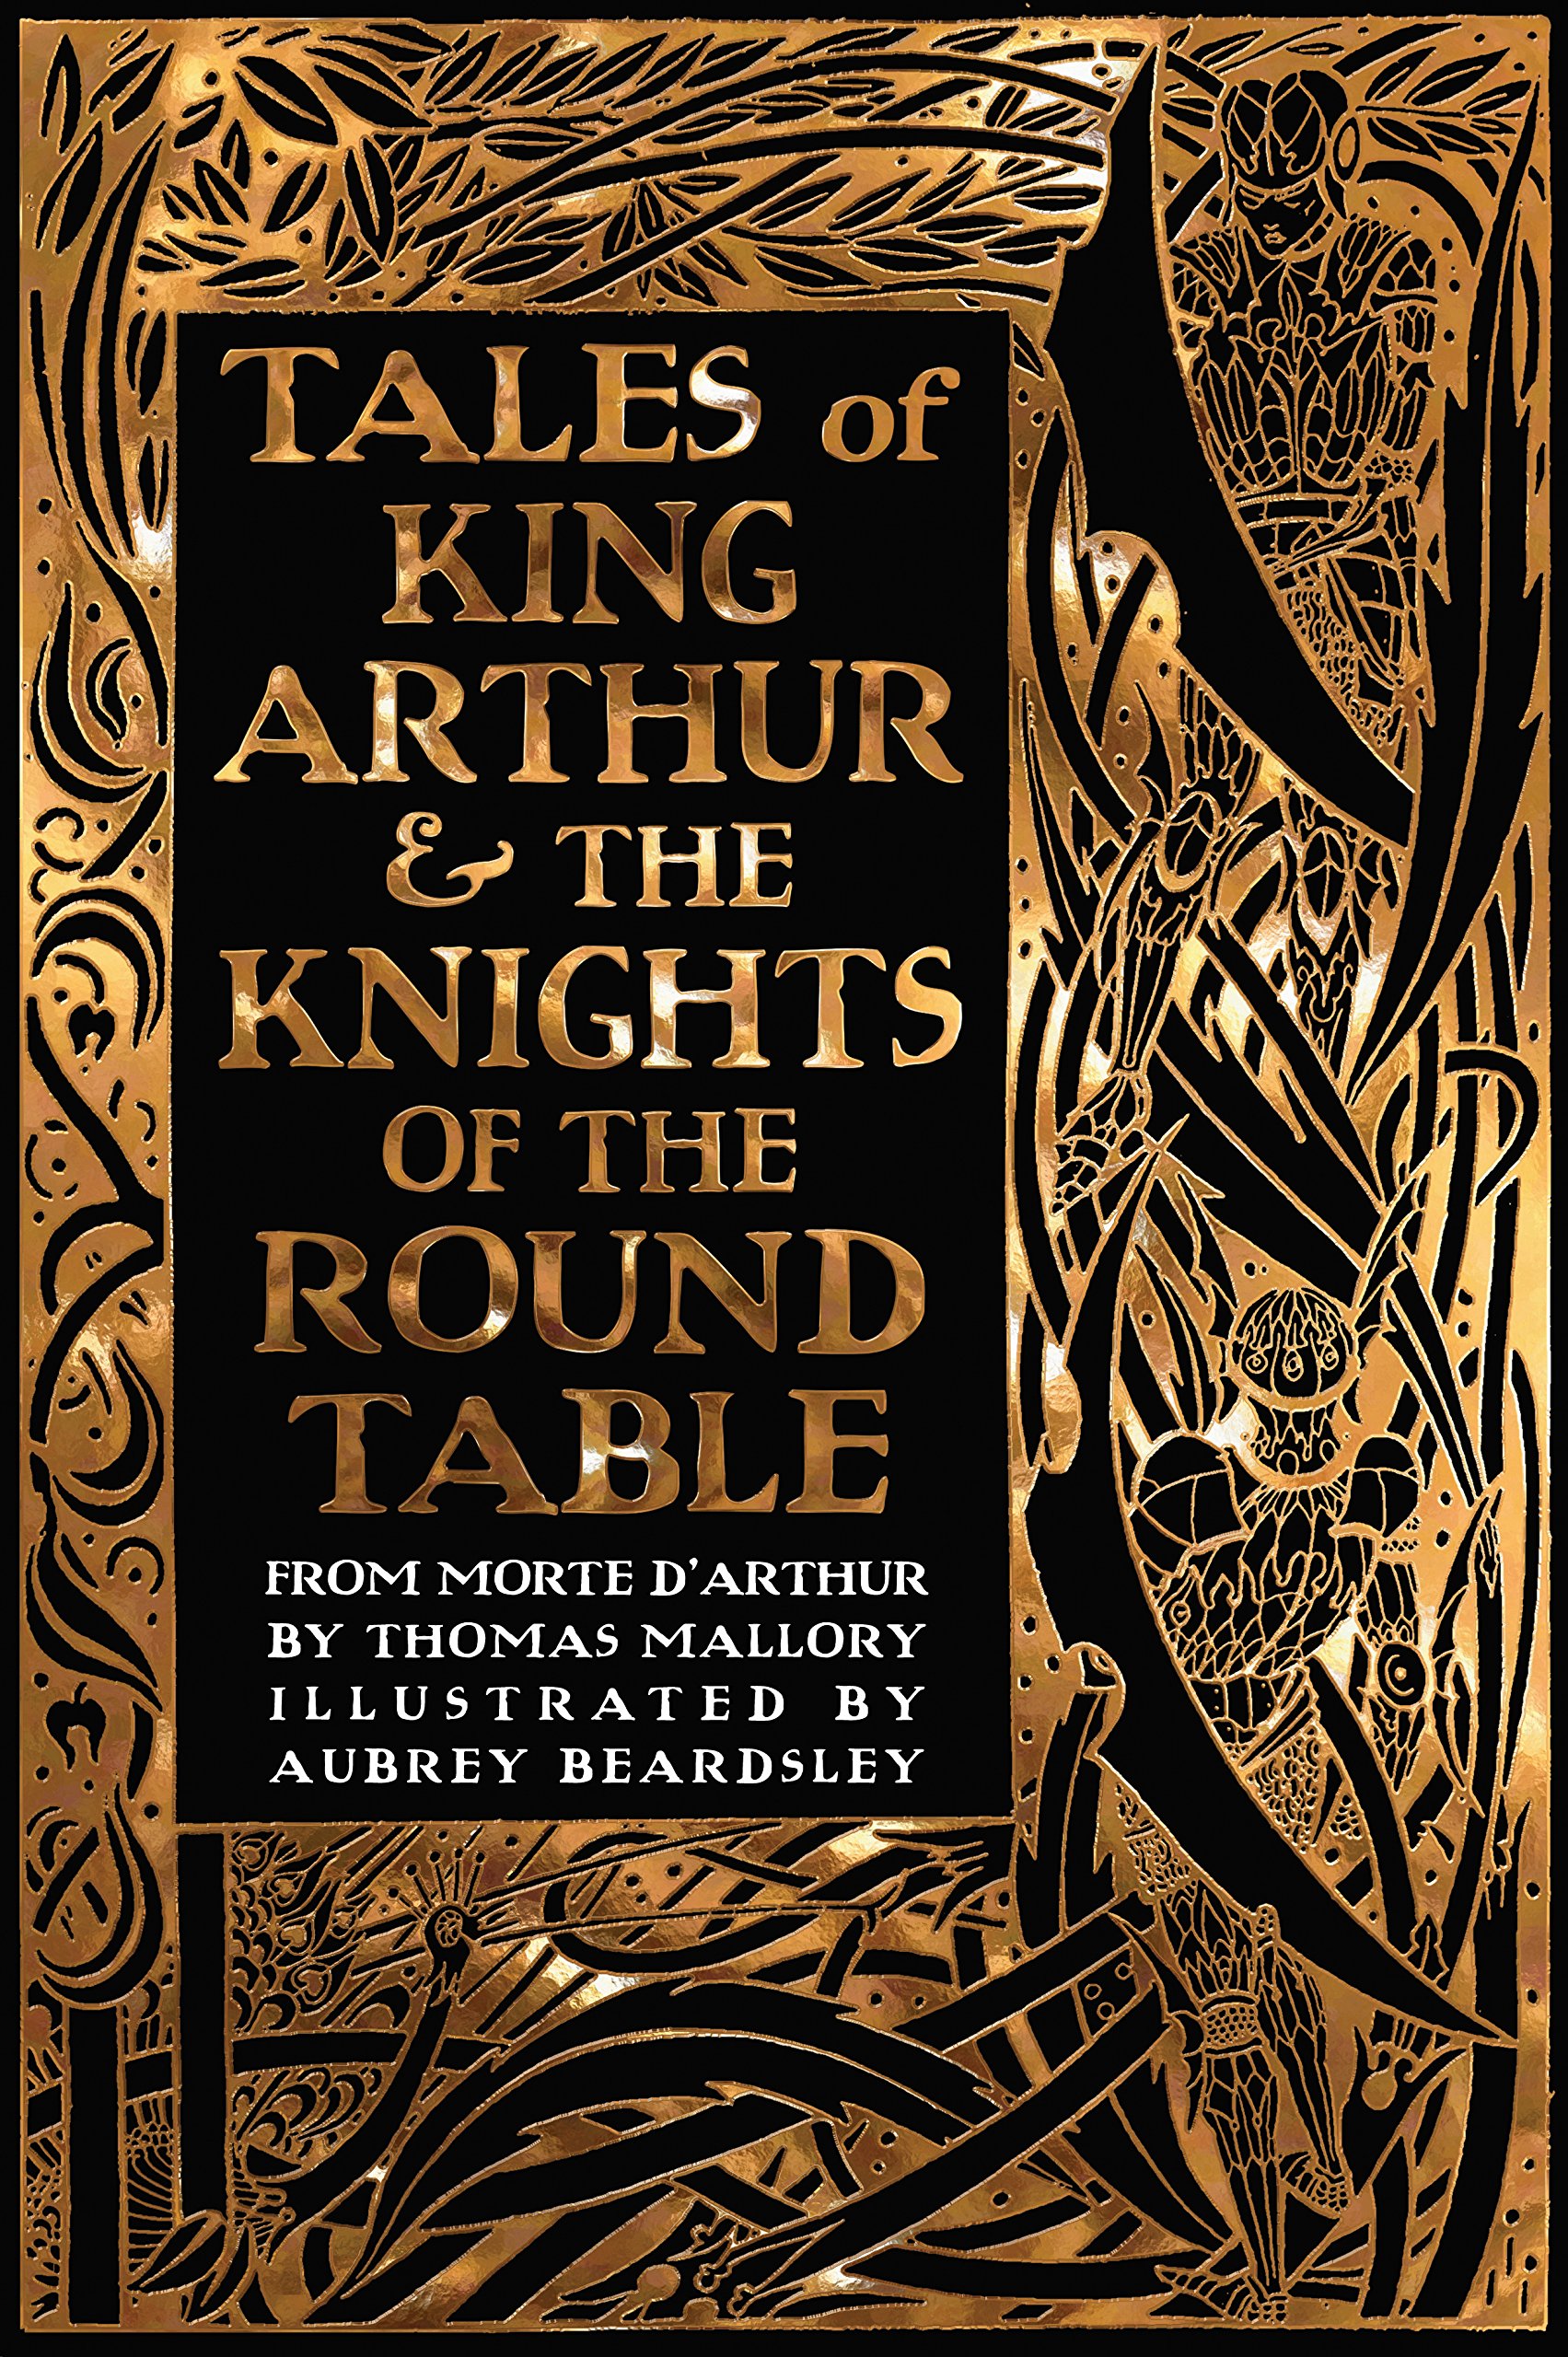 Tales of King Arthur & The Knights of the Round Table | Thomas Malory